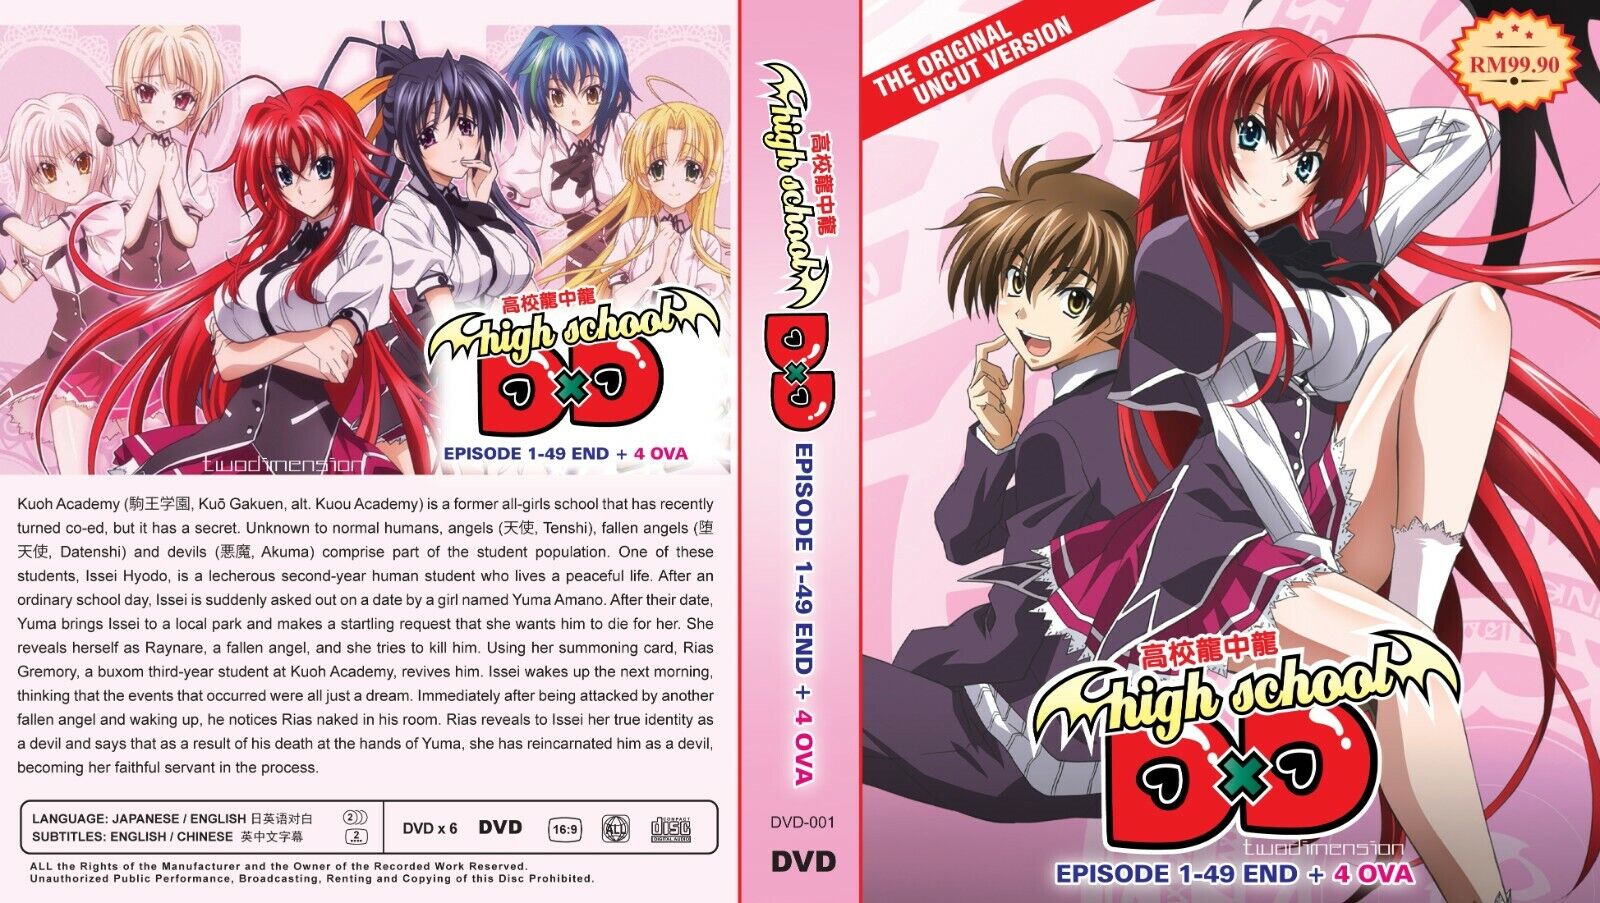 alejandra borge recommends highschool dxd eng sub pic